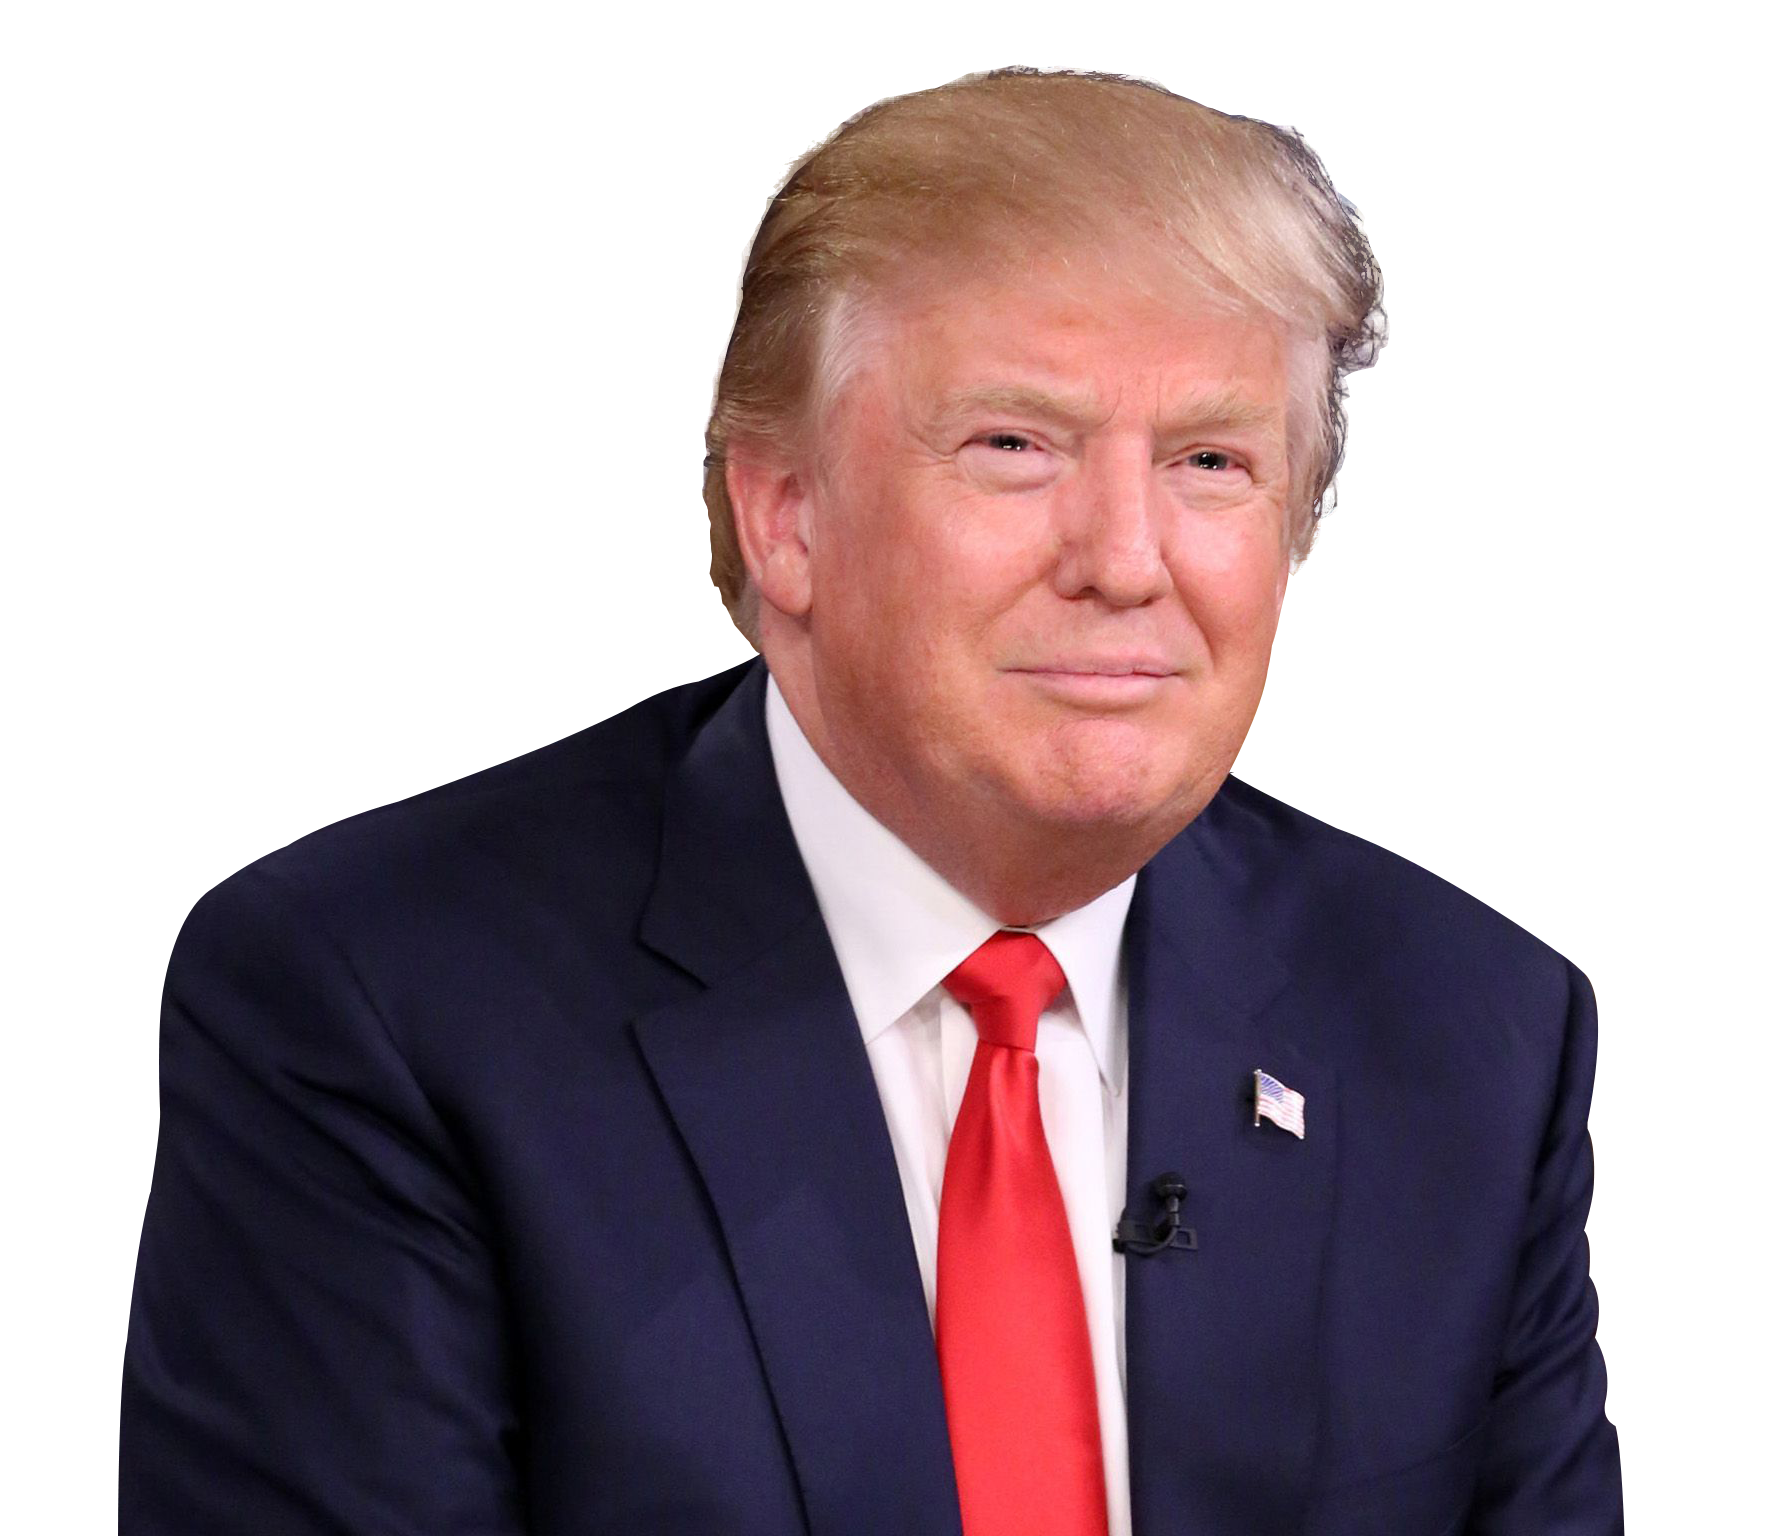 Free Download Of Donald Trump Icon Clipart 38868 Free Icons and PNG